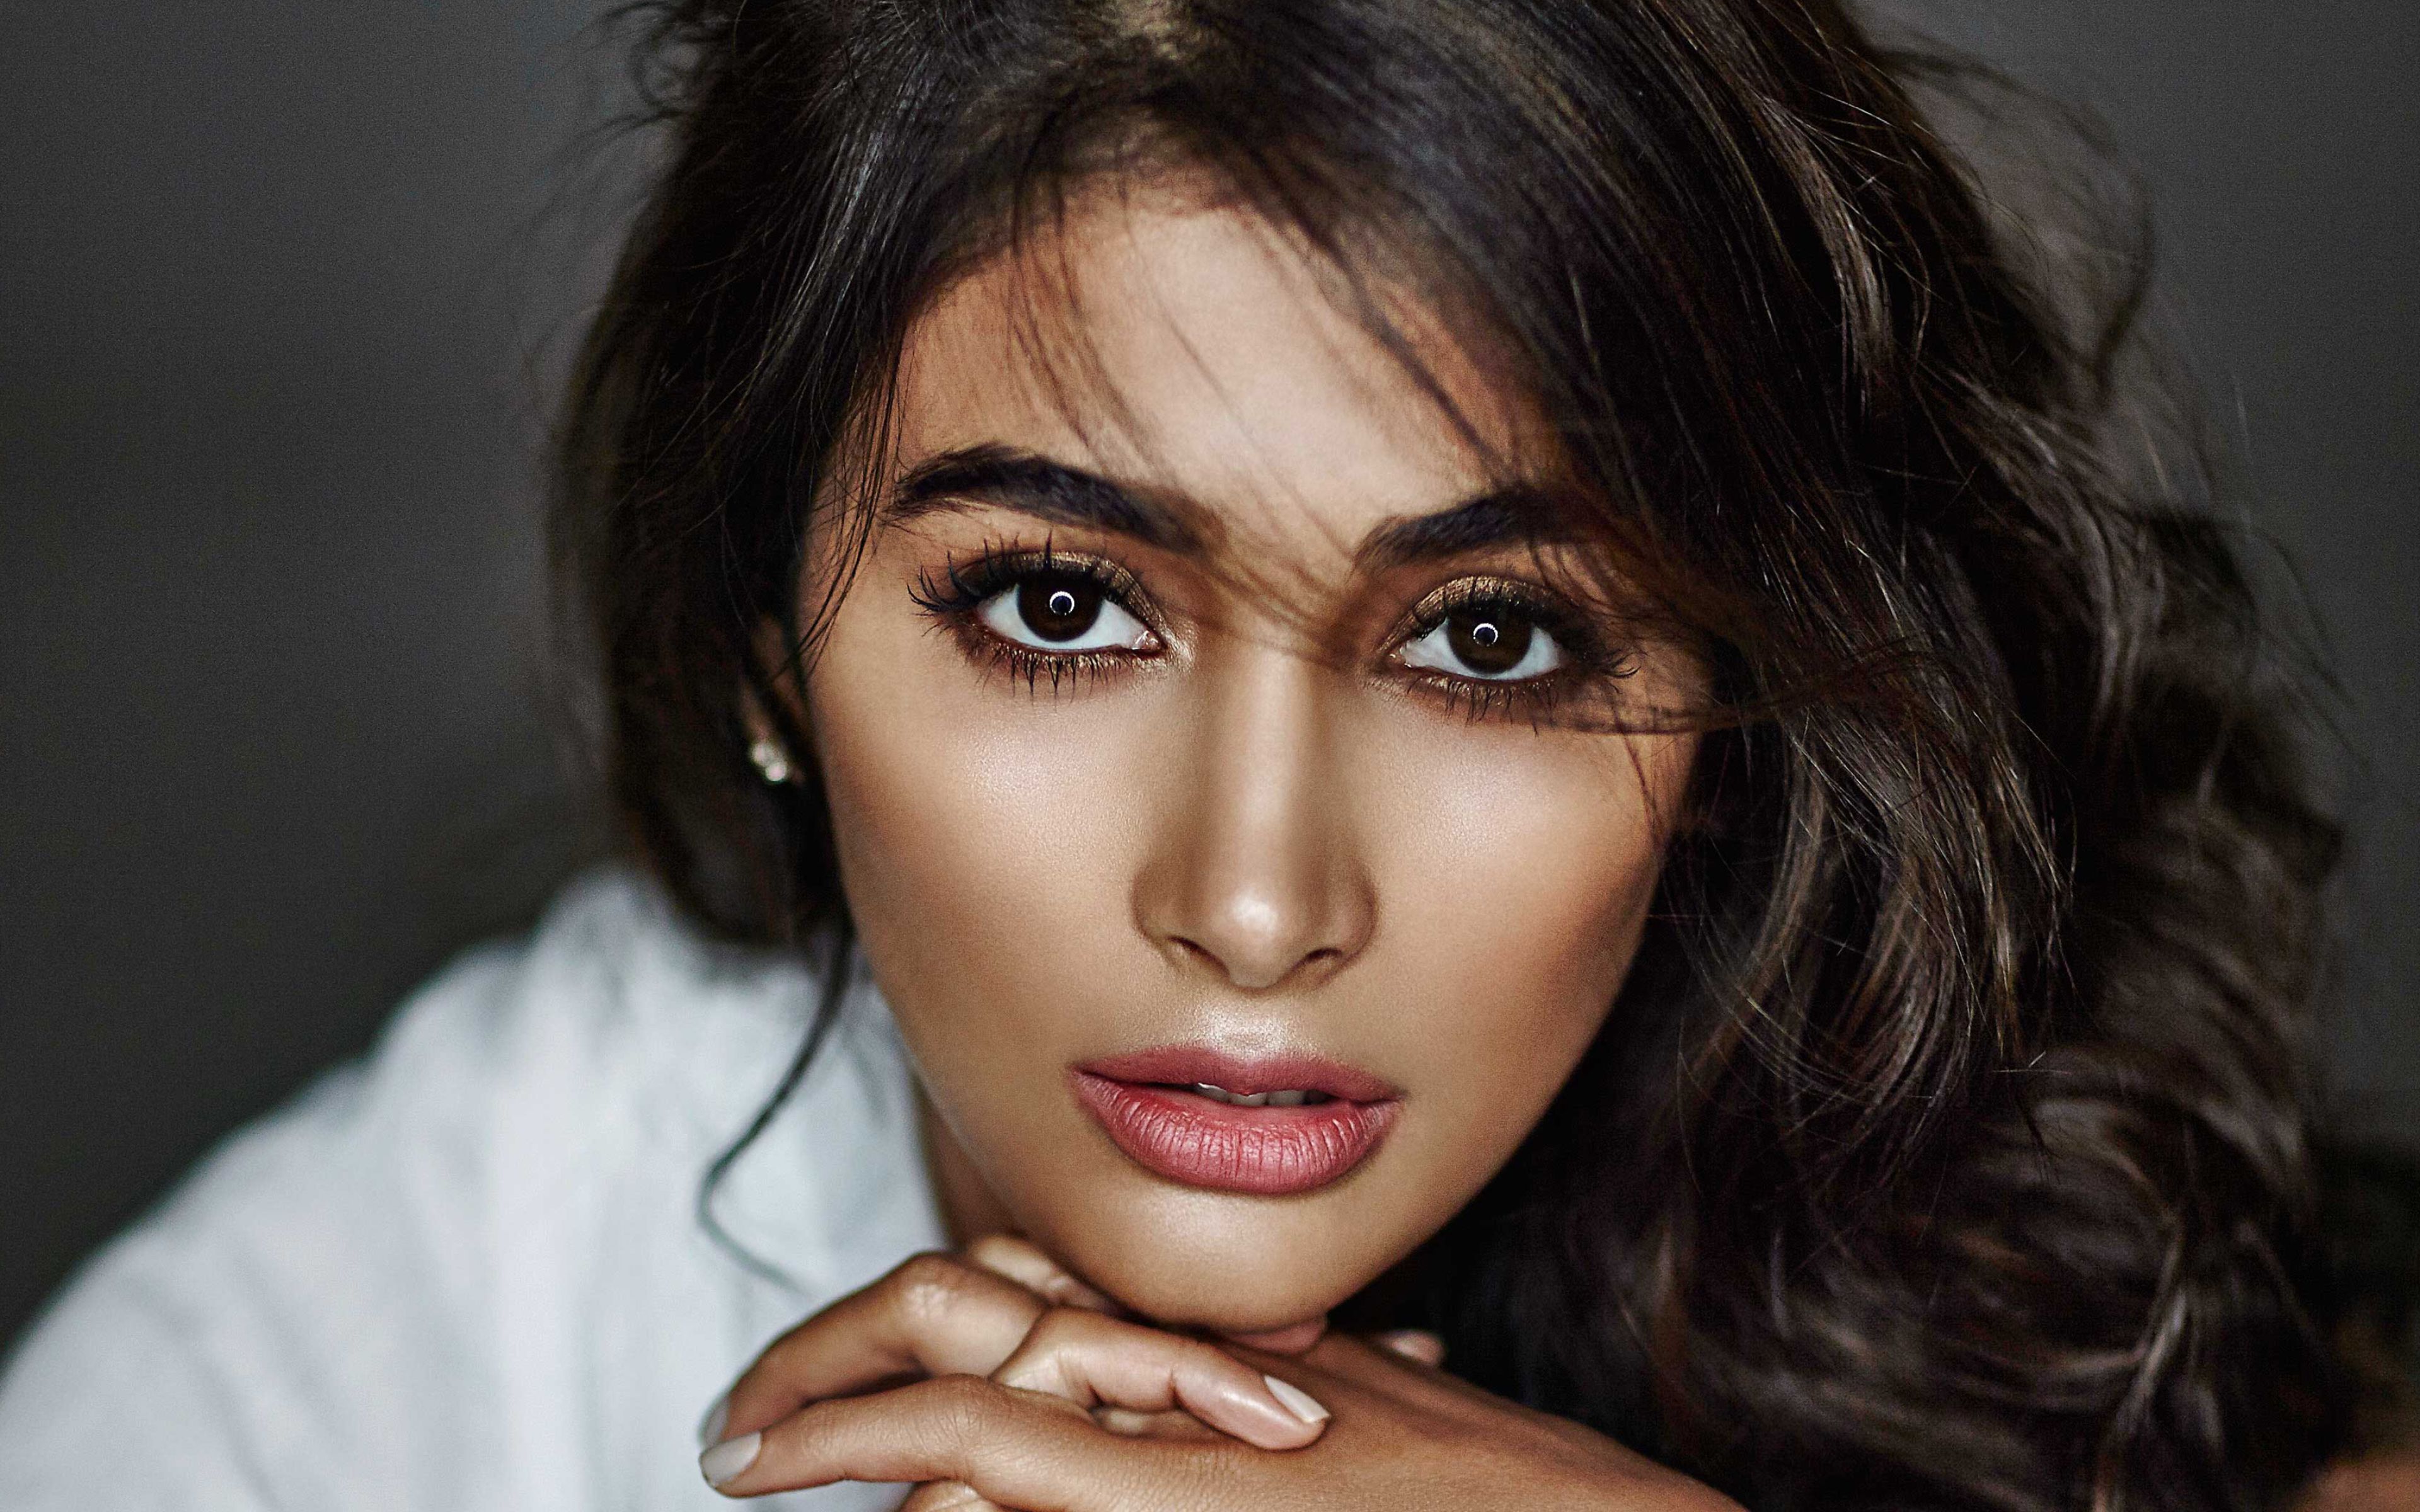 Download Wallpaper Pooja Hegde, Close Up, Bollywood, Photohoot, Portrait, Makeup, Indian Actress, Beauty For Desktop With Resolution 3840x2400. High Quality HD Picture Wallpaper